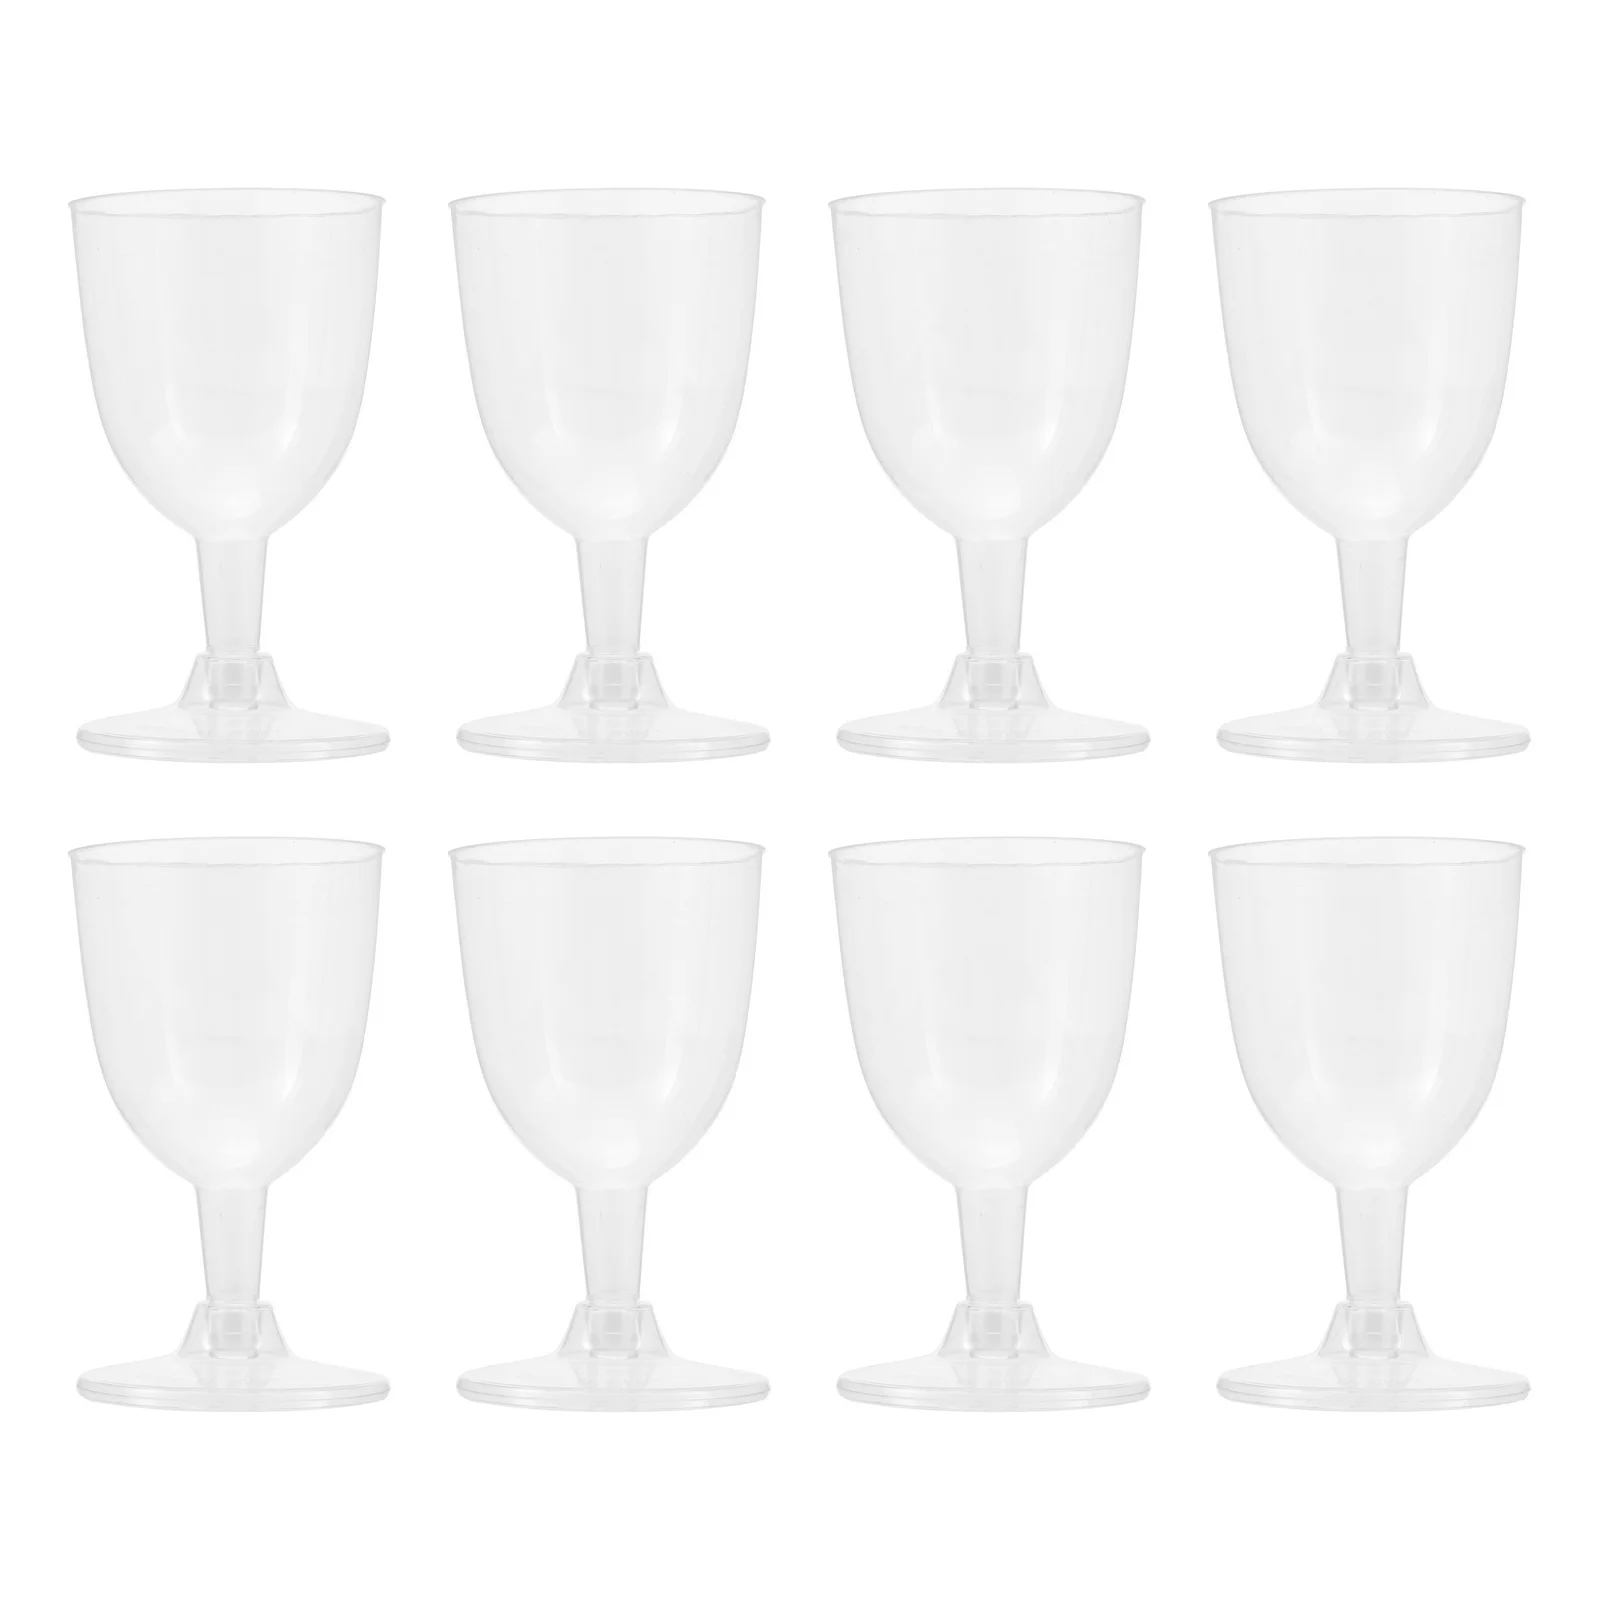 

Cups Bowl Cup Mousse Pudding Dessert Ice Cream Plastic Party Clear Mini Wedding De Goblets Toasting Glasses Disposable Cocktail